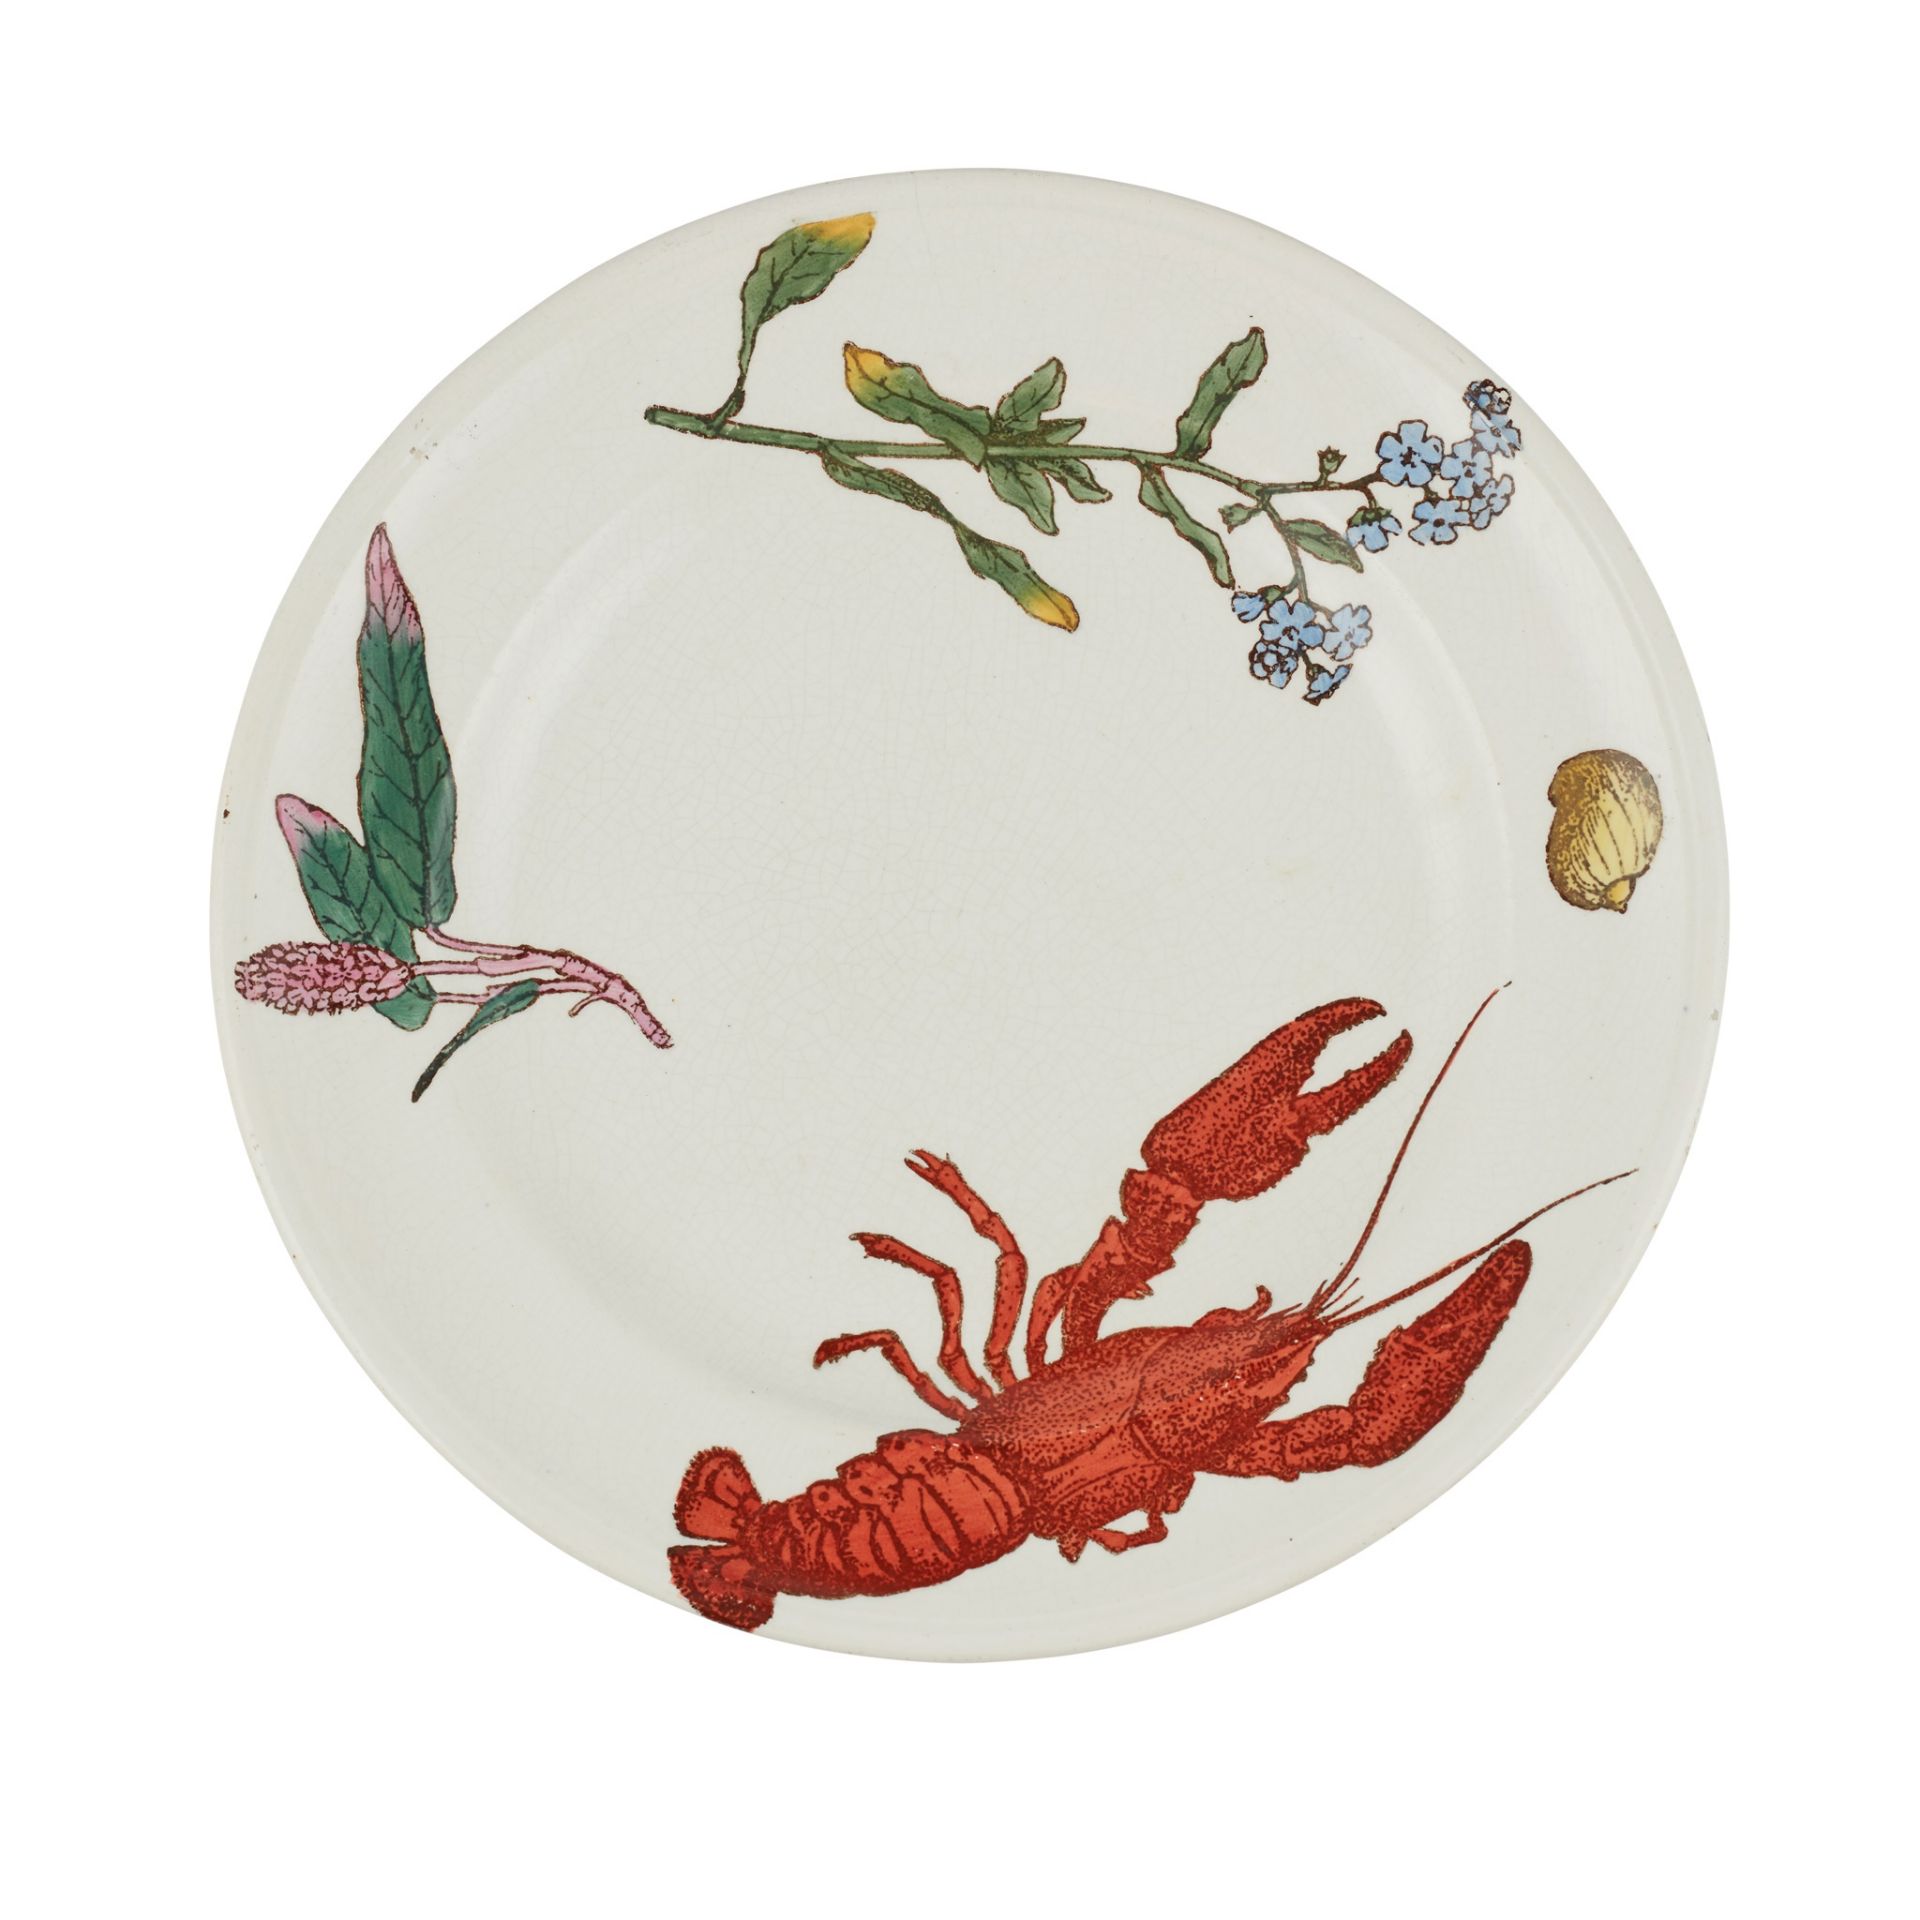 WILLIAM STEPHEN COLEMAN (1829-1904) FOR MINTON & CO. SET OF TEN ‘NATURALIST SERIES’ PLATES, CIRCA - Image 2 of 7